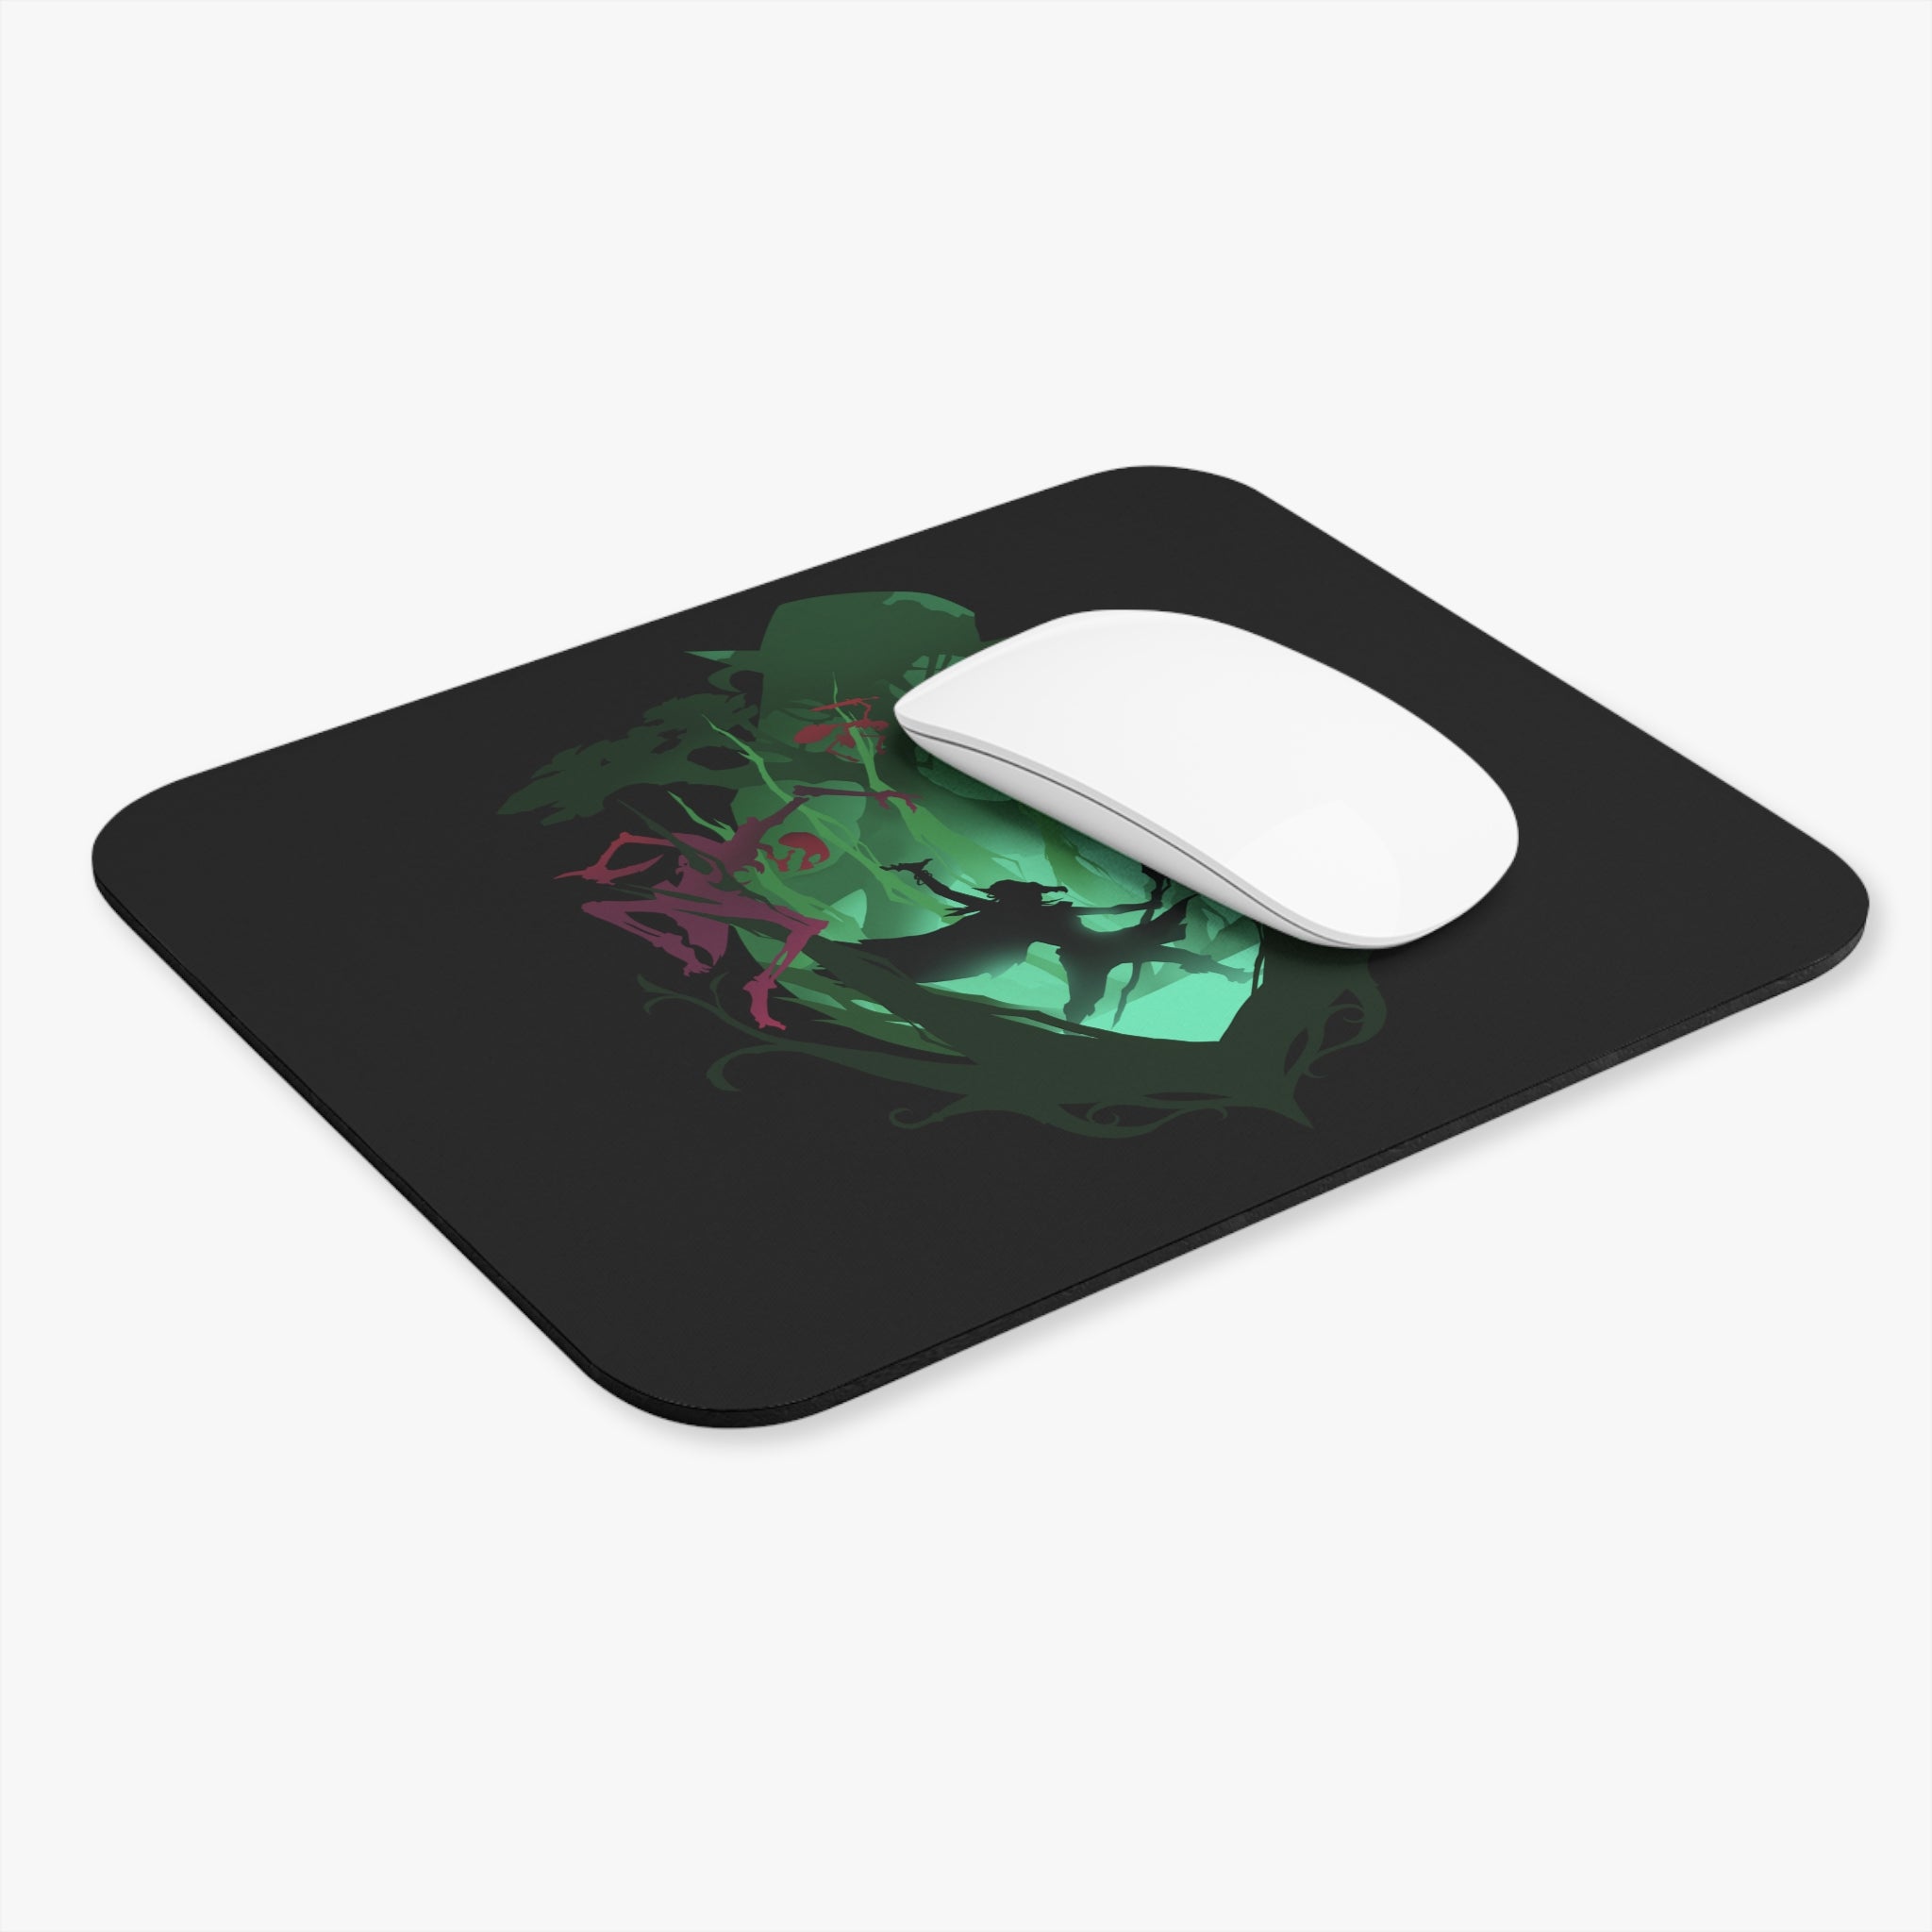 DRUID CLASS SILHOUETTE RECTANGLER MOUSE PAD